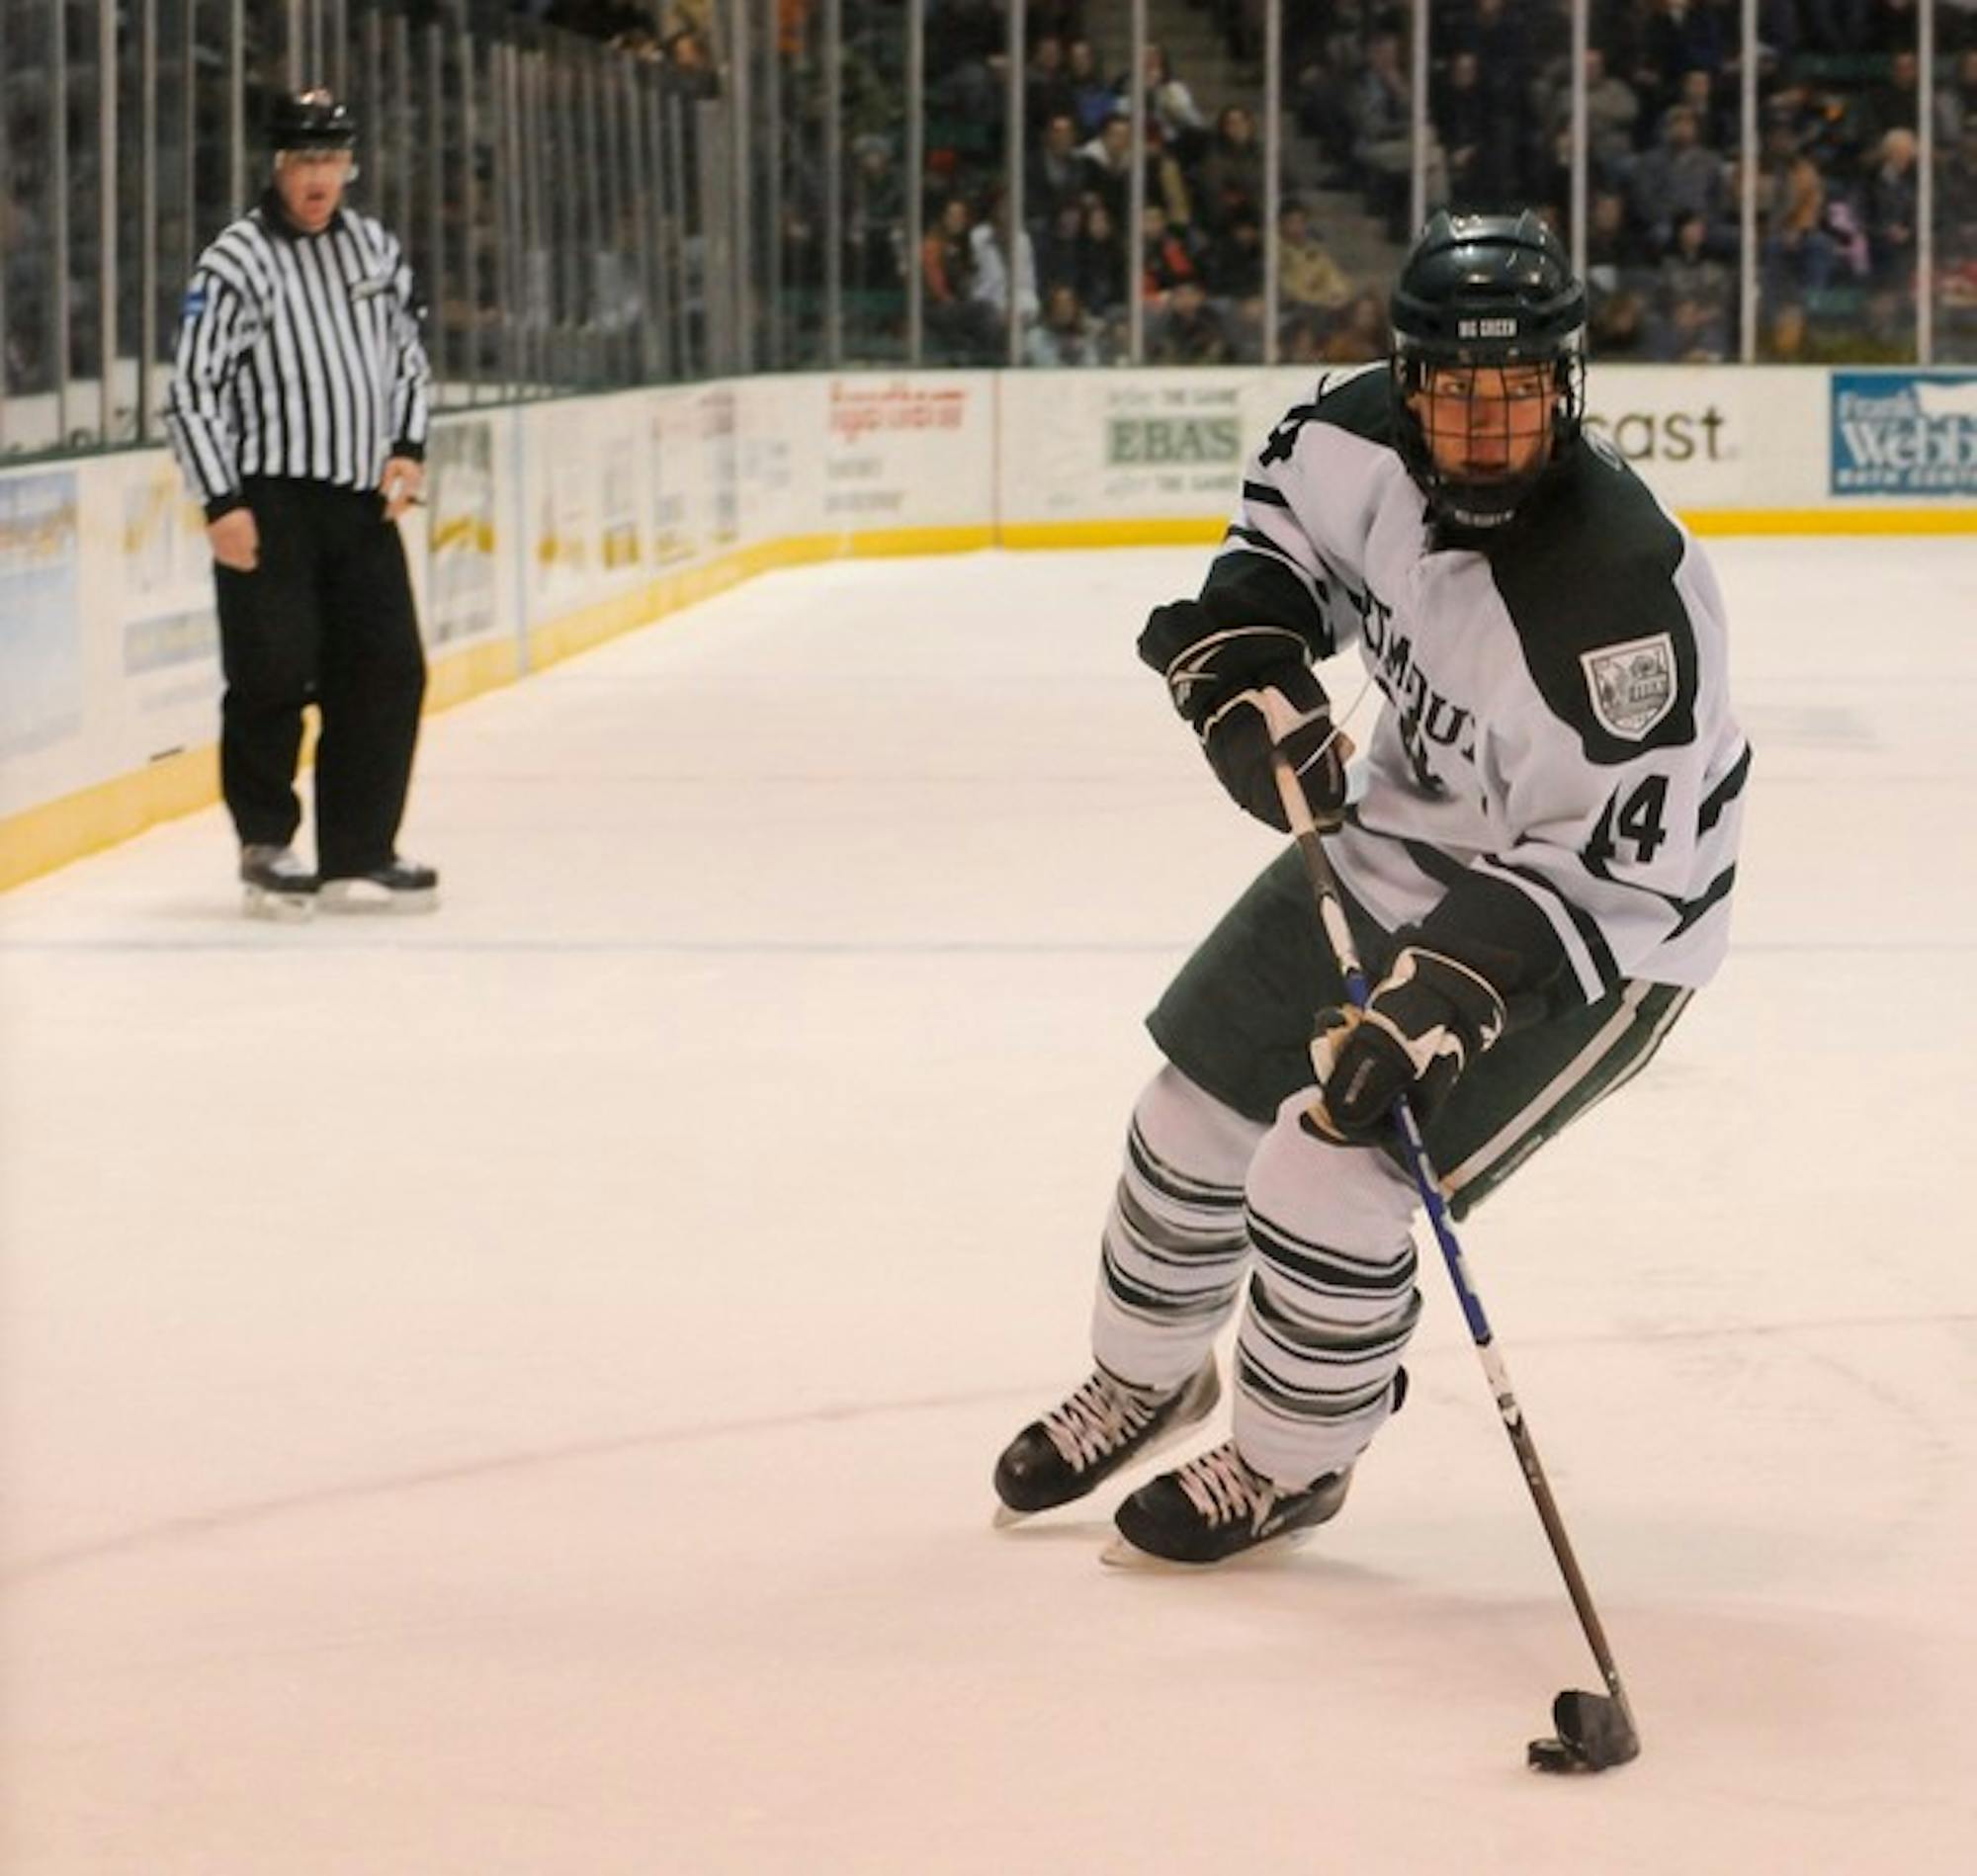 Dartmouth men's hockey will take on in-state rival University of New Hampshire on Saturday at the Verizon Center in Manchester, N.H.